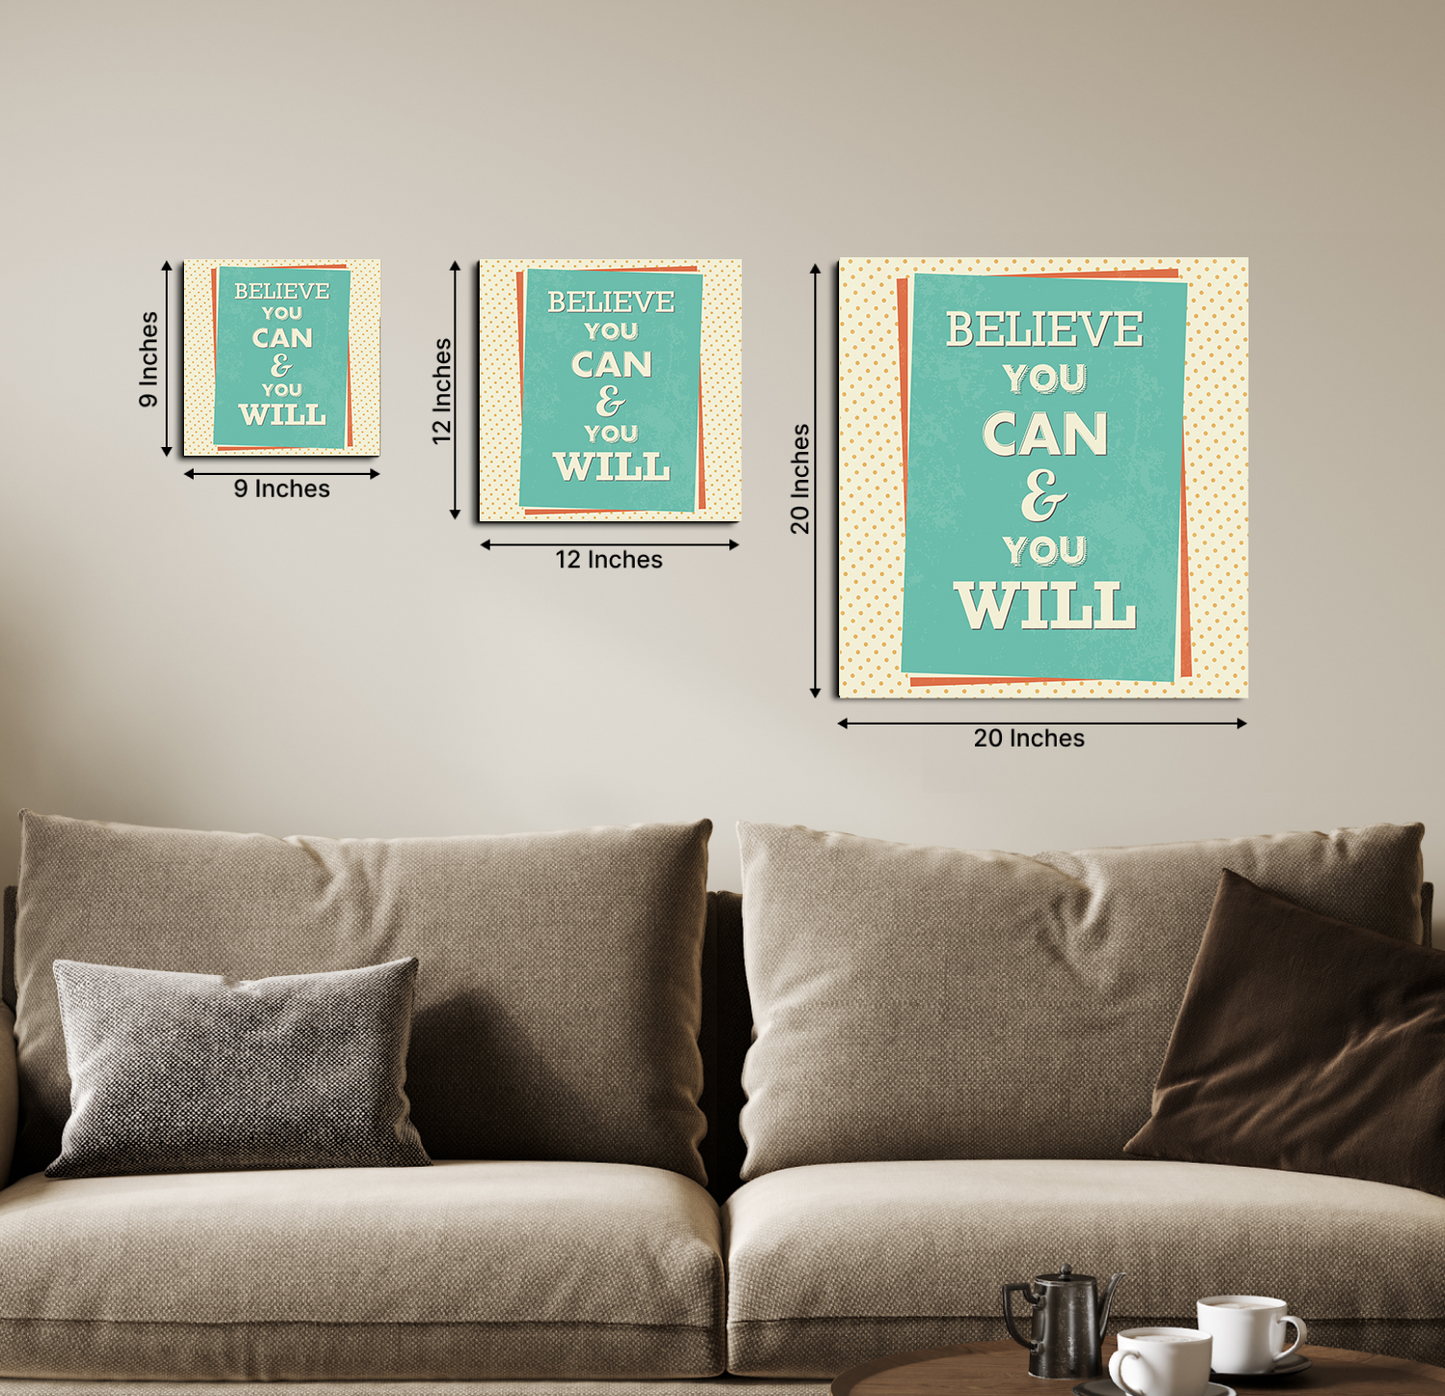 Believe You Can and You Will Motivational Quote Wood Print Wall Art